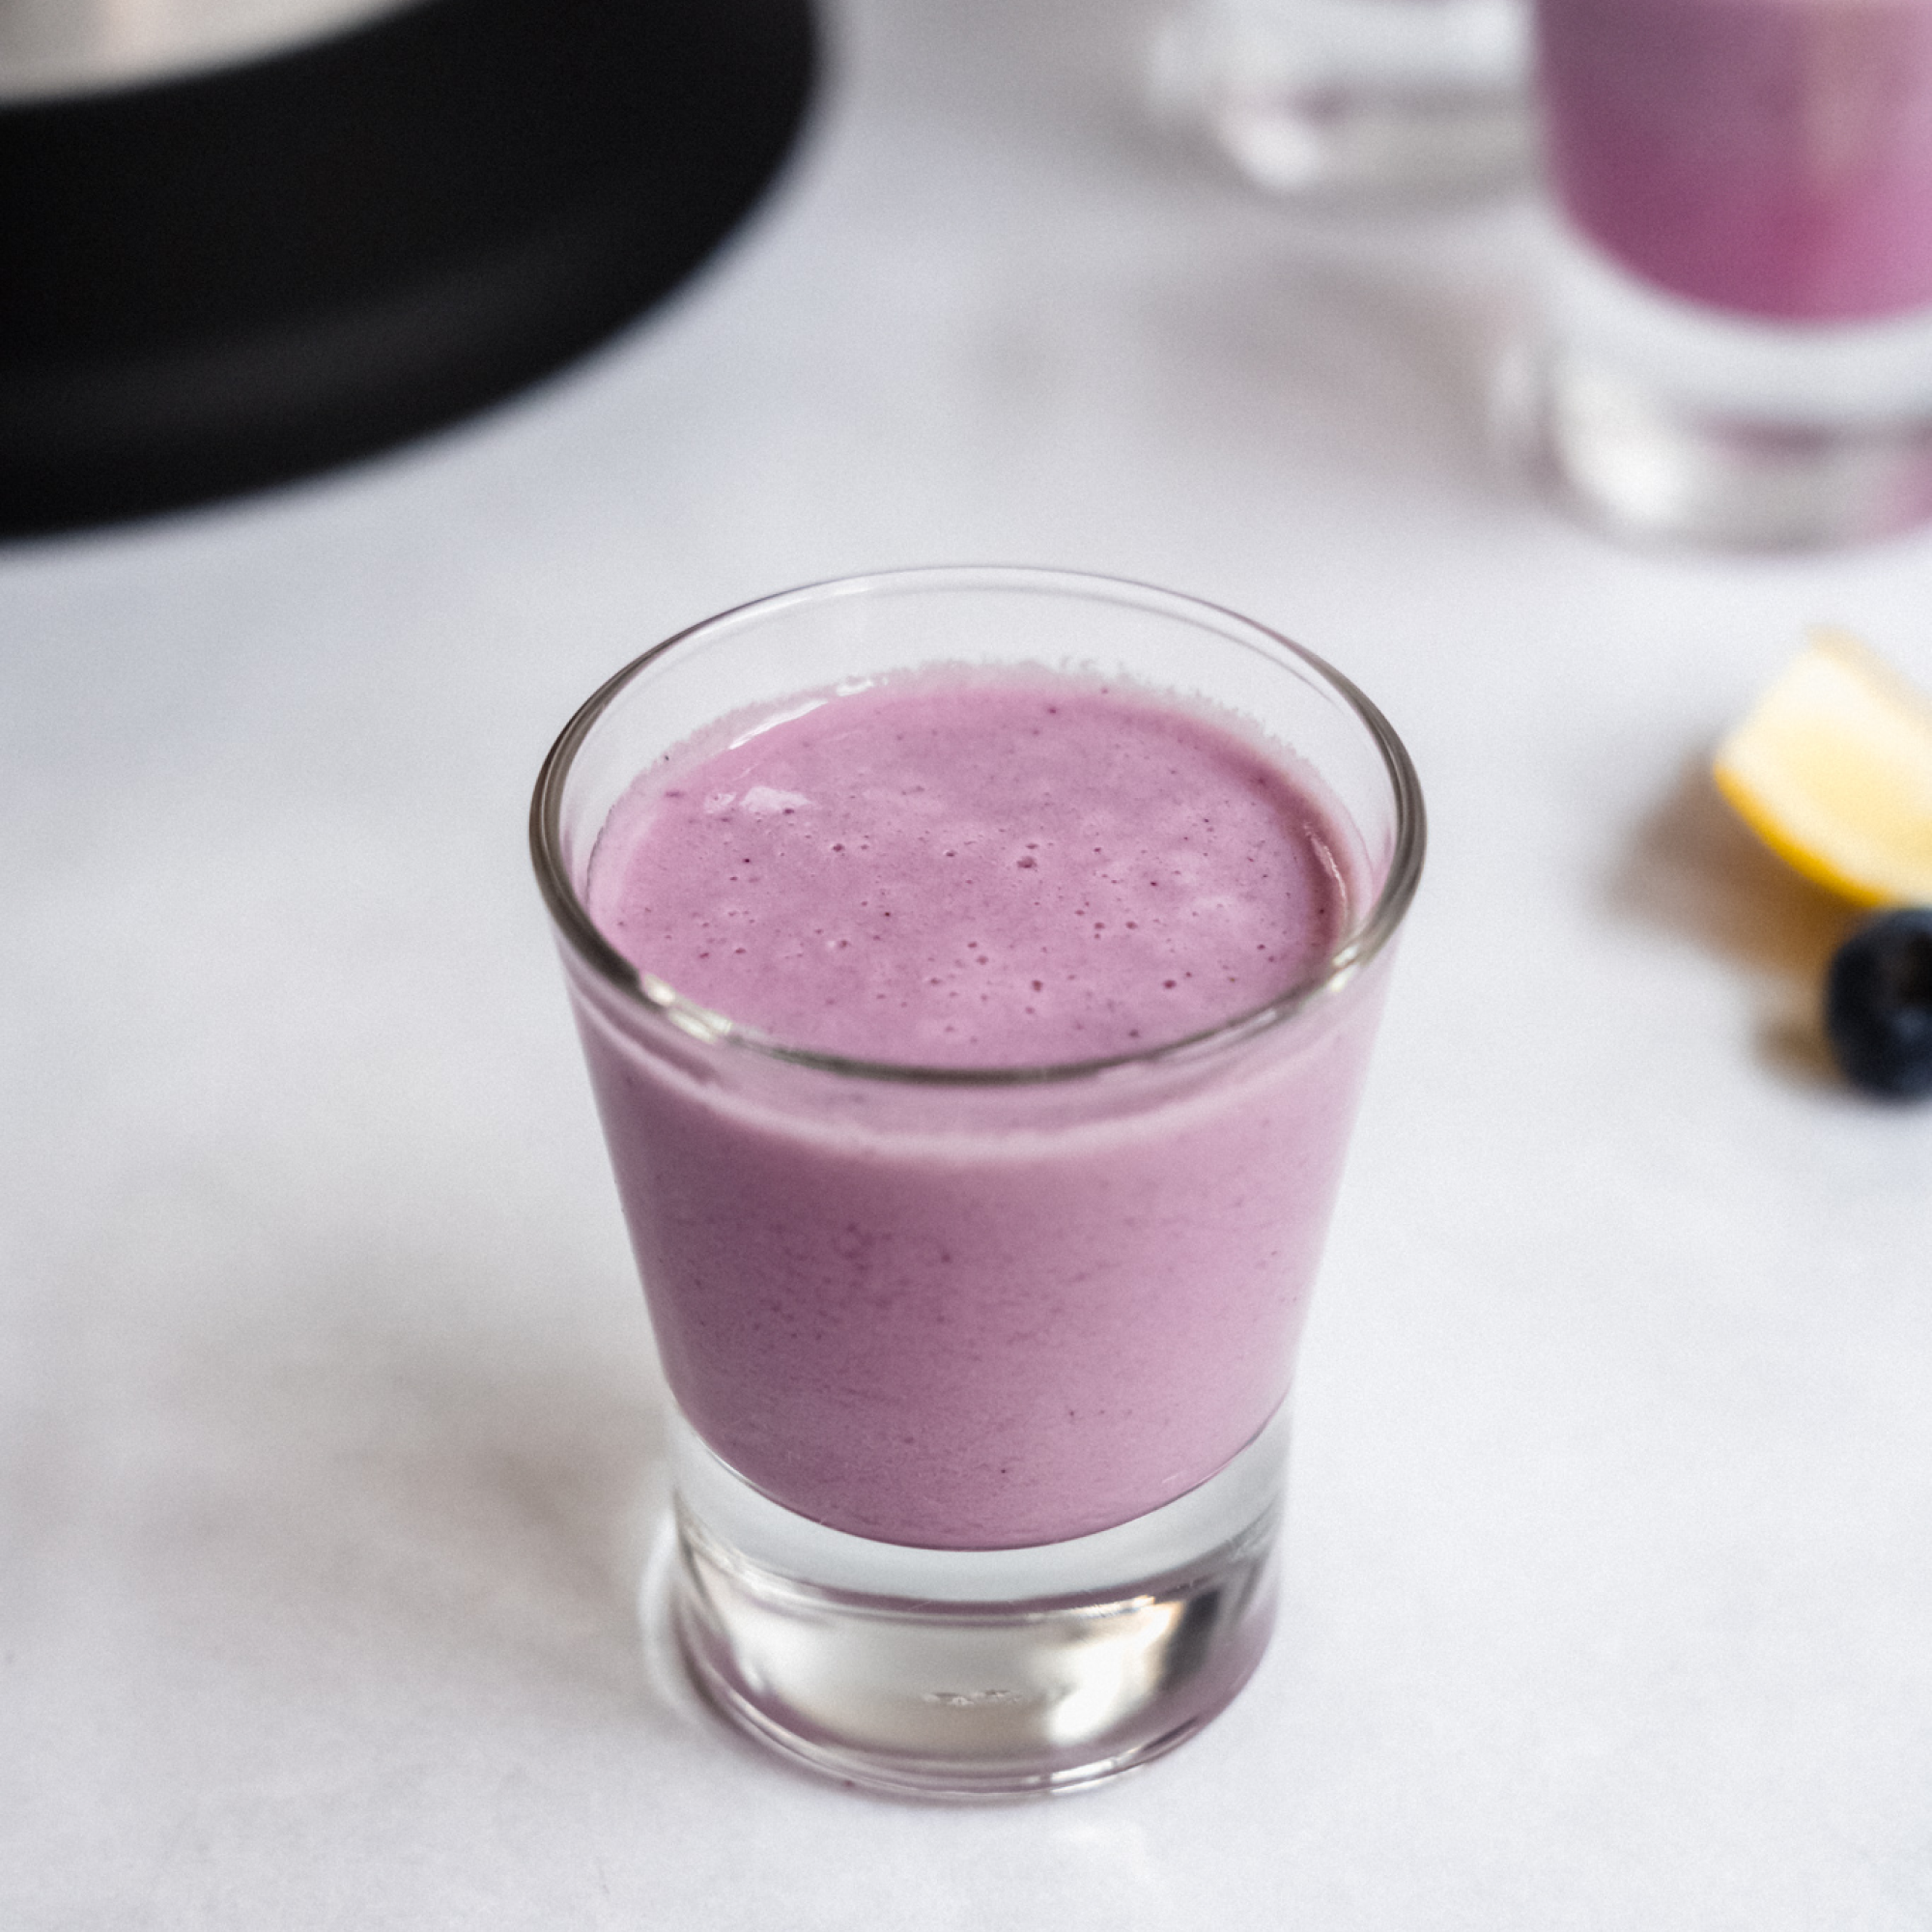 Blueberry Lemon Probiotic Shot made in the Almond Cow